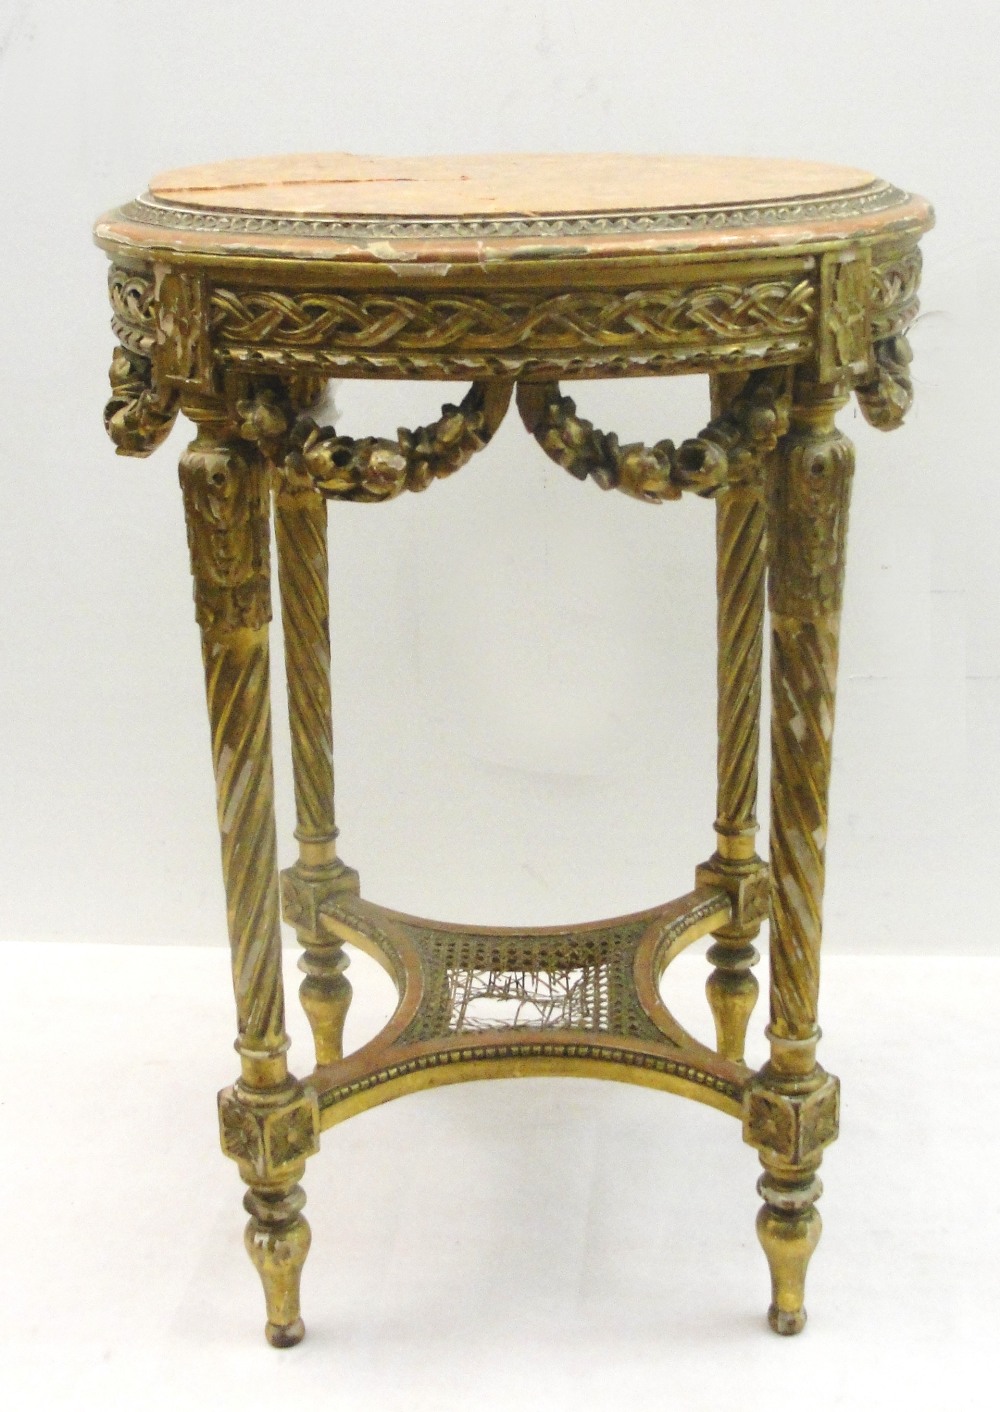 A Late 19th Century Giltwood and Marble Topped Circular Table:
the laurel swags suspended from a